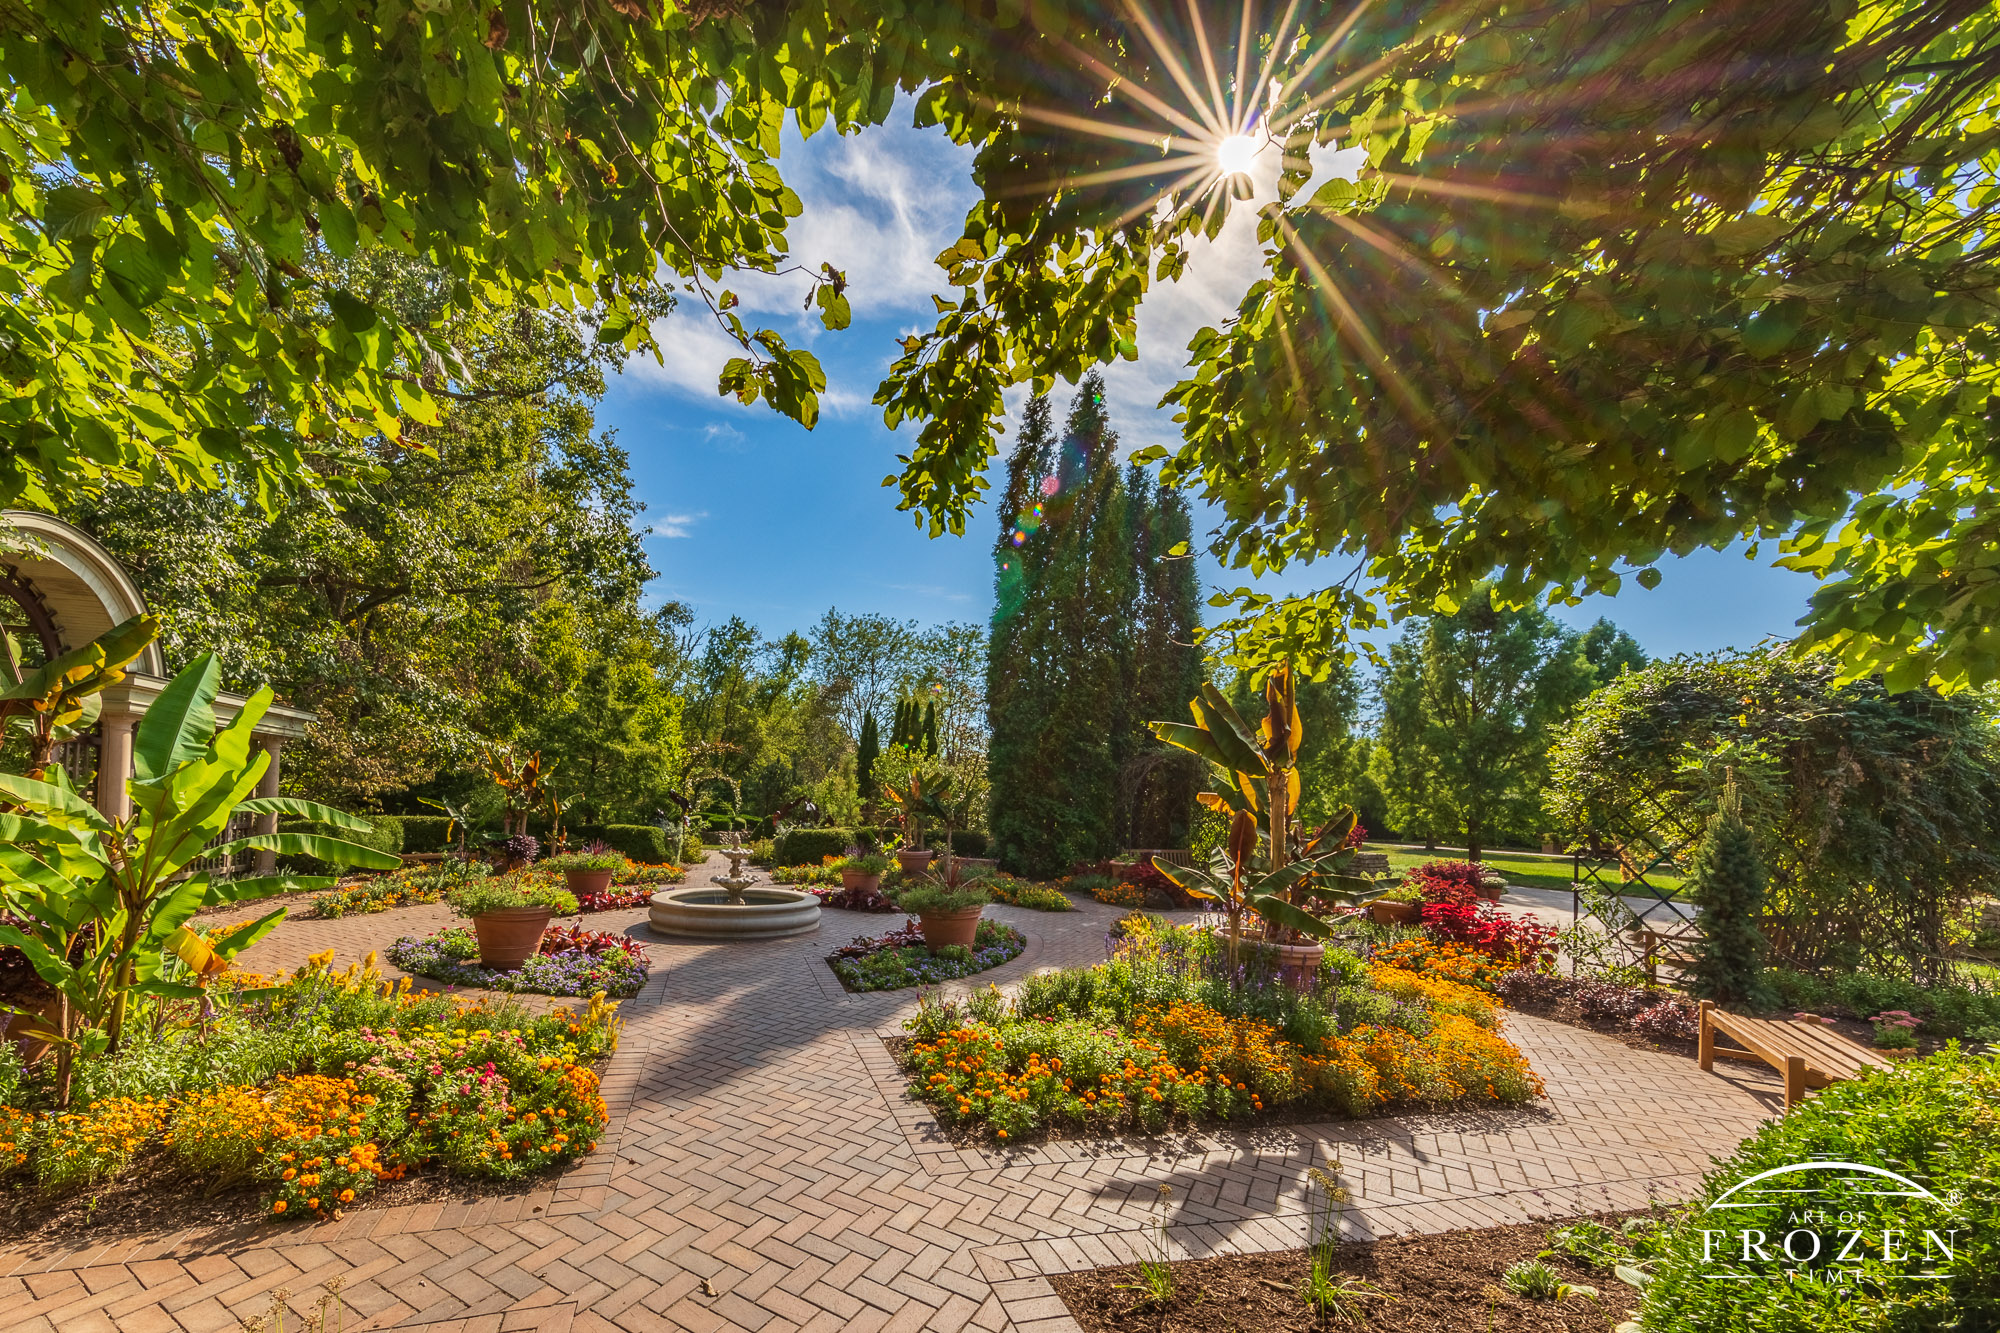 A view of a curved walkway under the Arbor Garden at Wegerzyn Gardens MetroPark where the sun sidelights the path and flower beds.